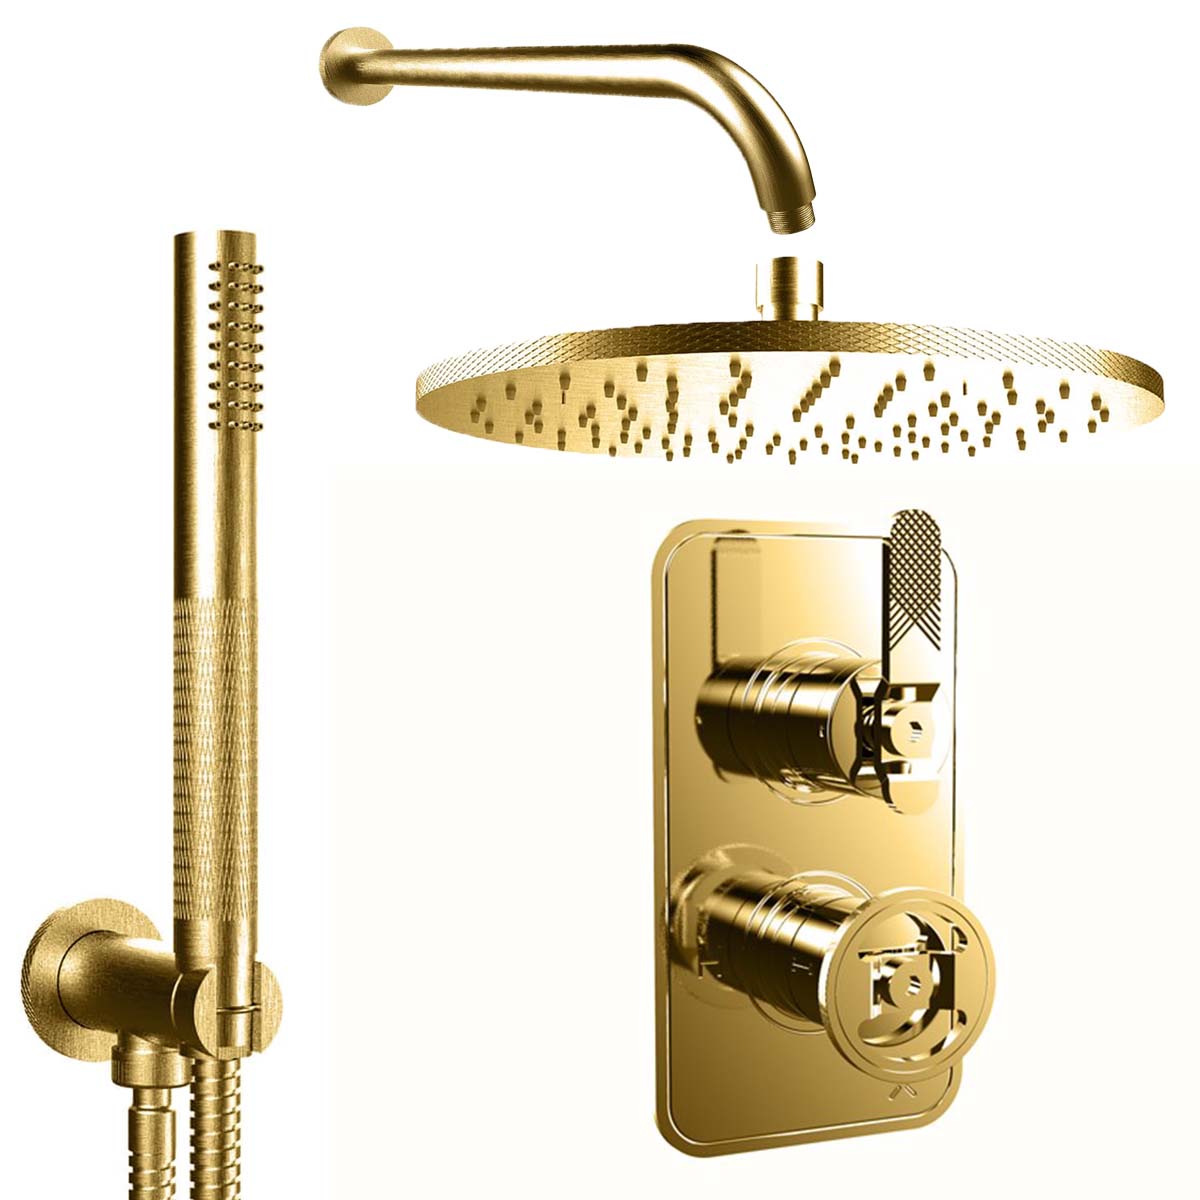 Crosswater Union 2 Outlet Thermostatic Shower Valve With Handset and Wall Mounted Overhead Union Brass